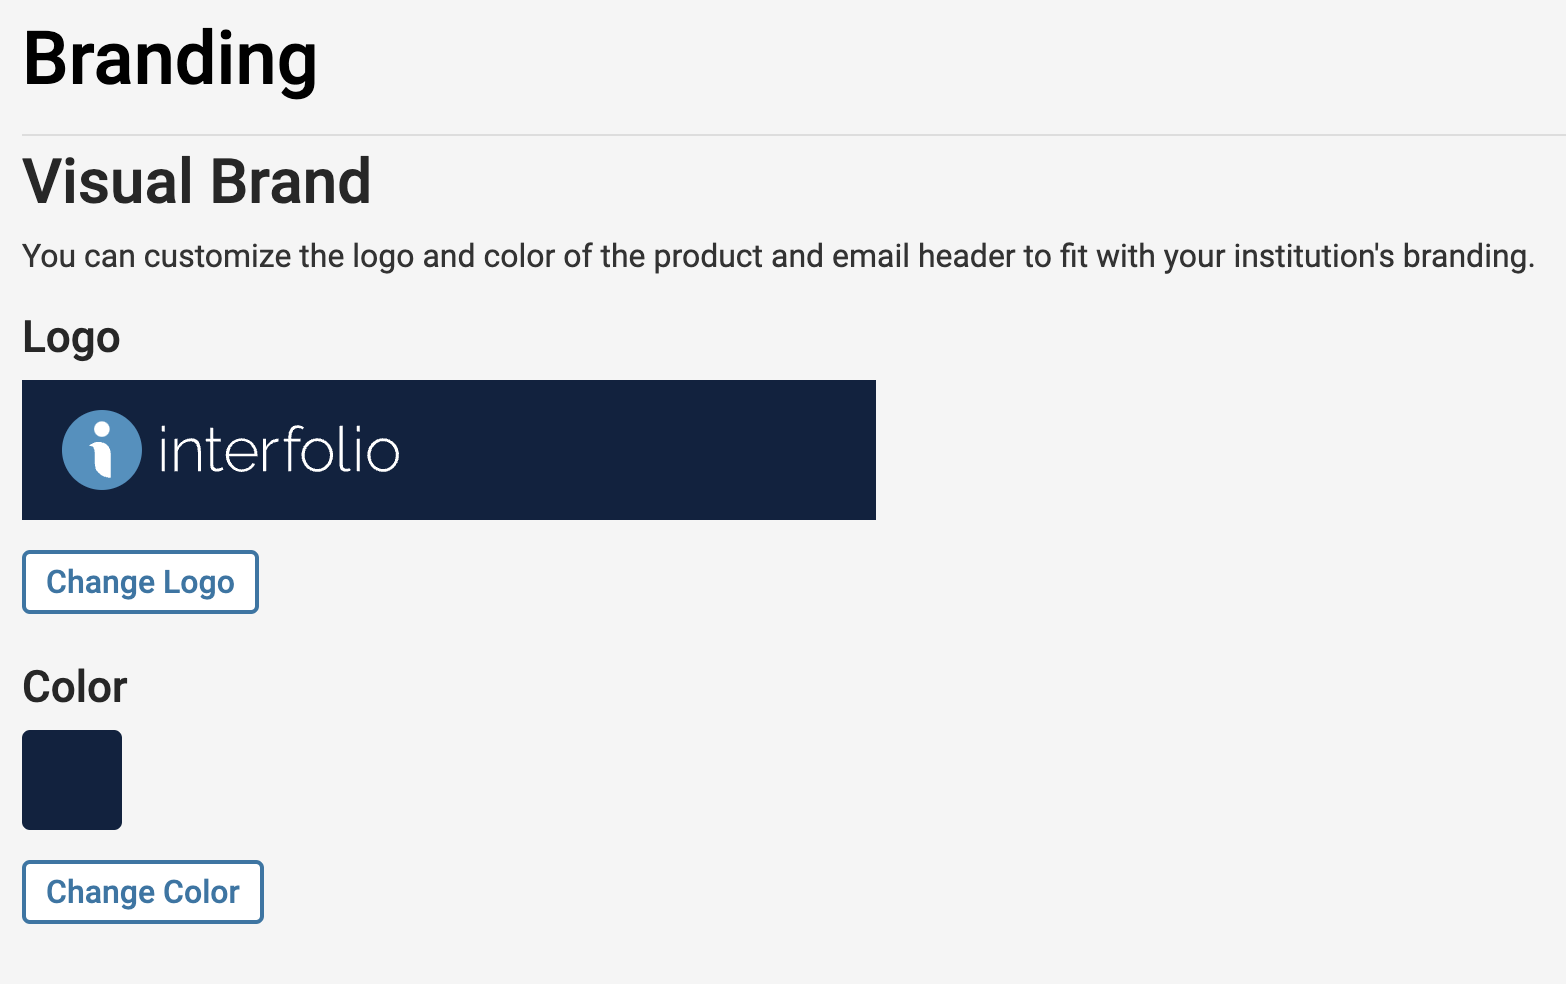 Visual Brand section below the Branding page with a Logo section with a Change Logo button and a Color section with a Change Color button